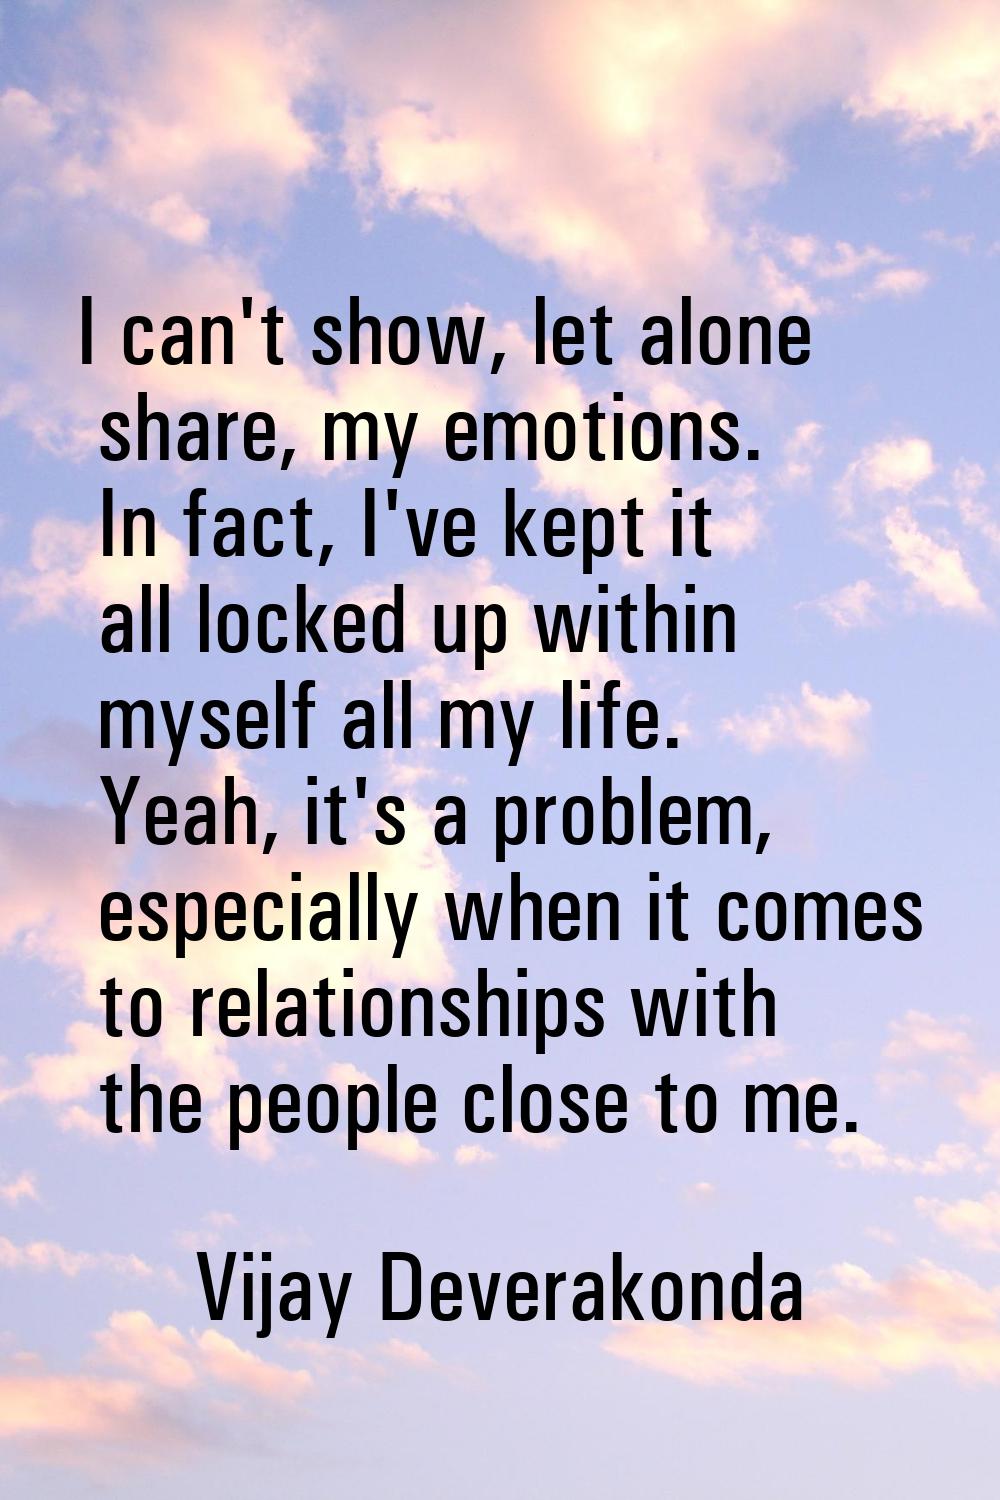 I can't show, let alone share, my emotions. In fact, I've kept it all locked up within myself all m